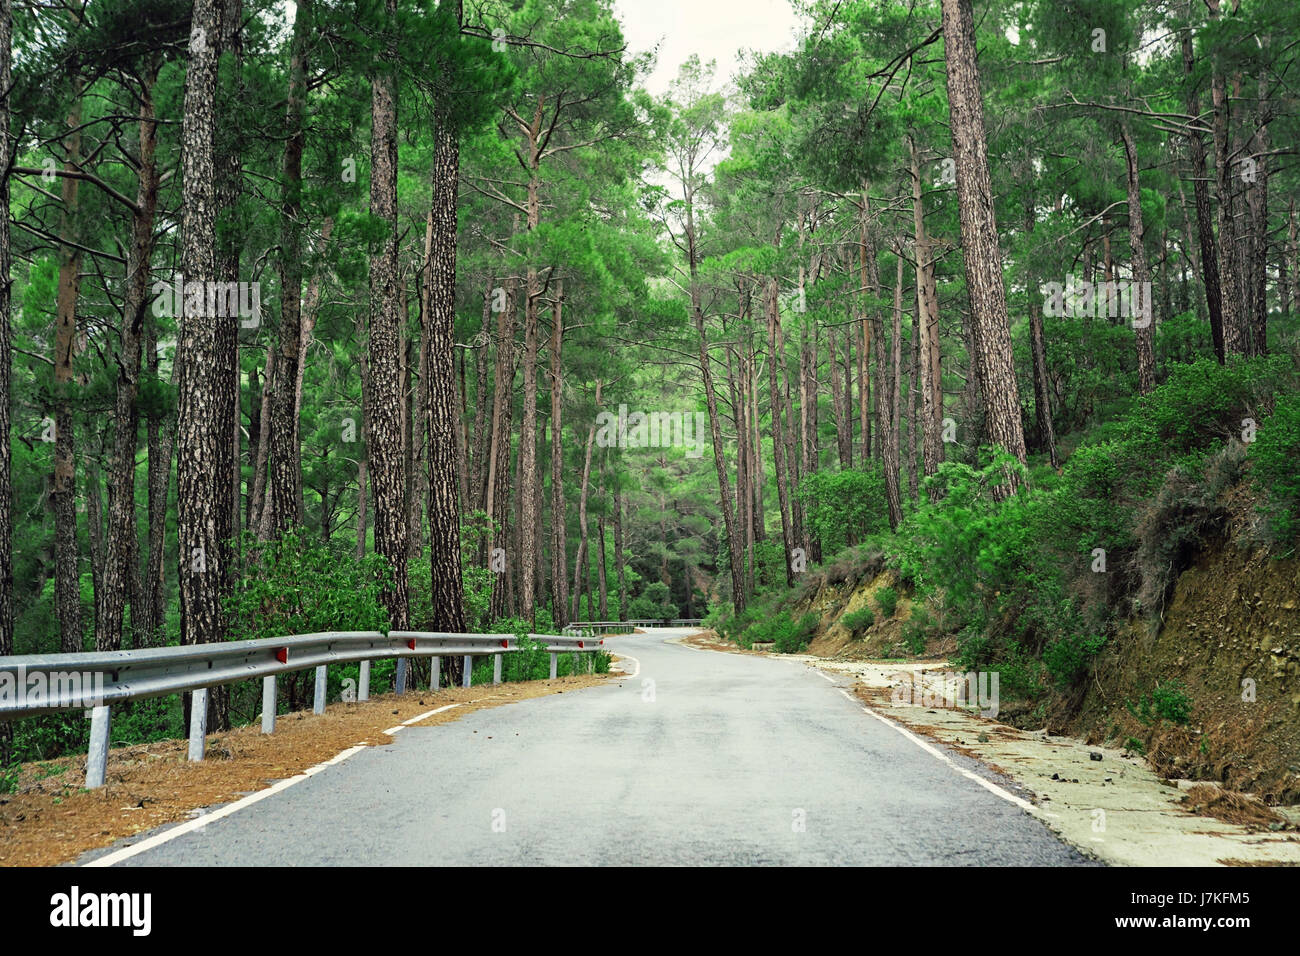 Stunning Scenic Route Through The Woods In The Mountains Stock Photo